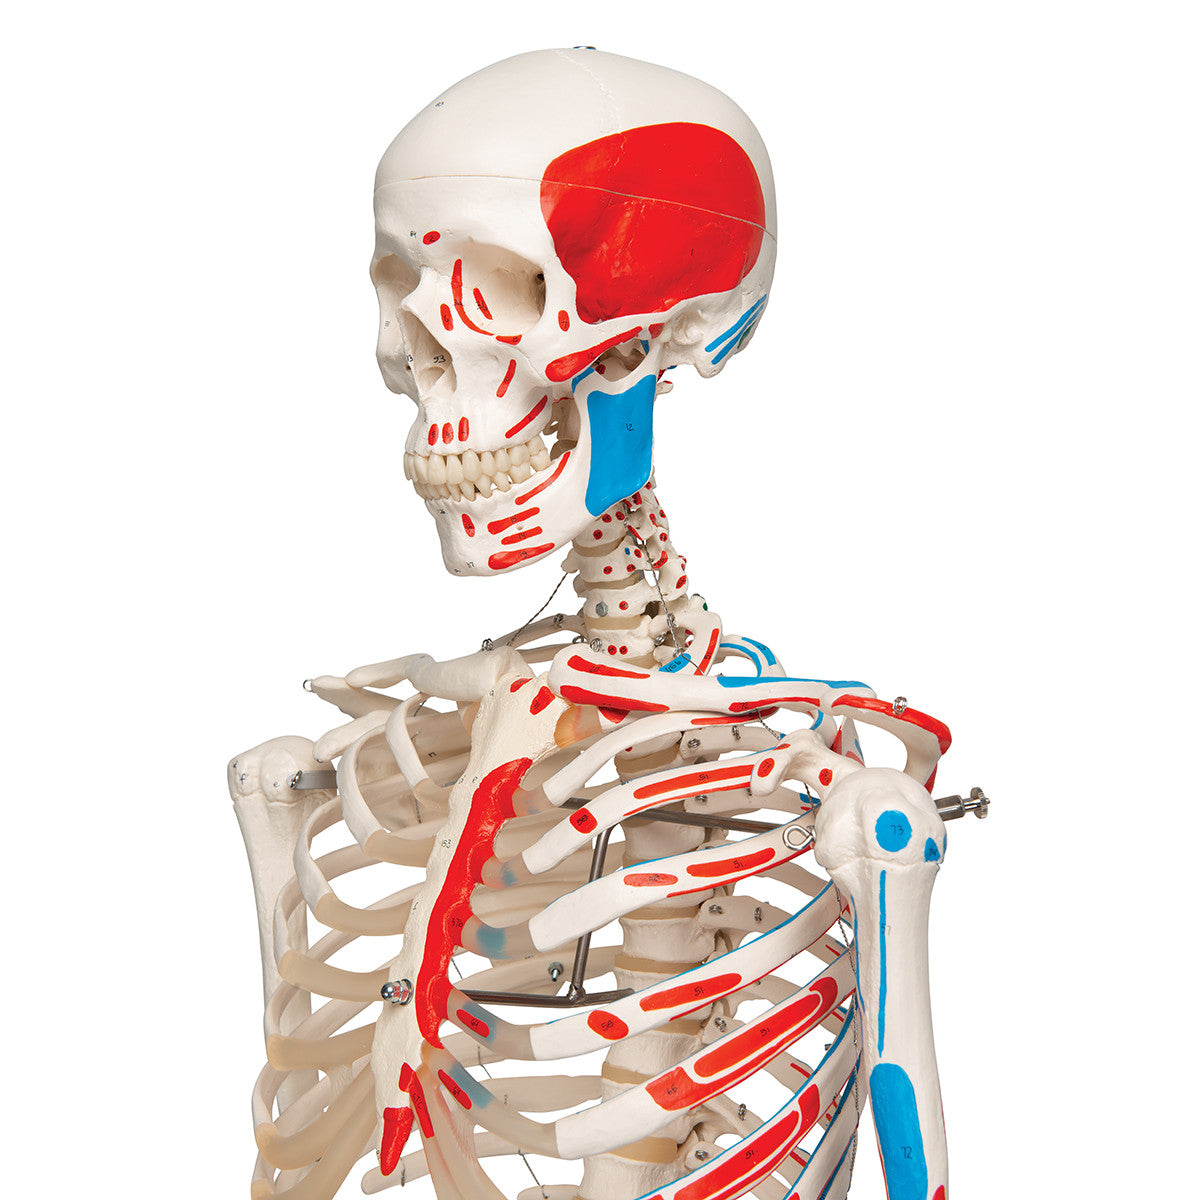 Artificial Skeleton Model with Painted Muscle Origins and Inserts | 3B Scientific A11